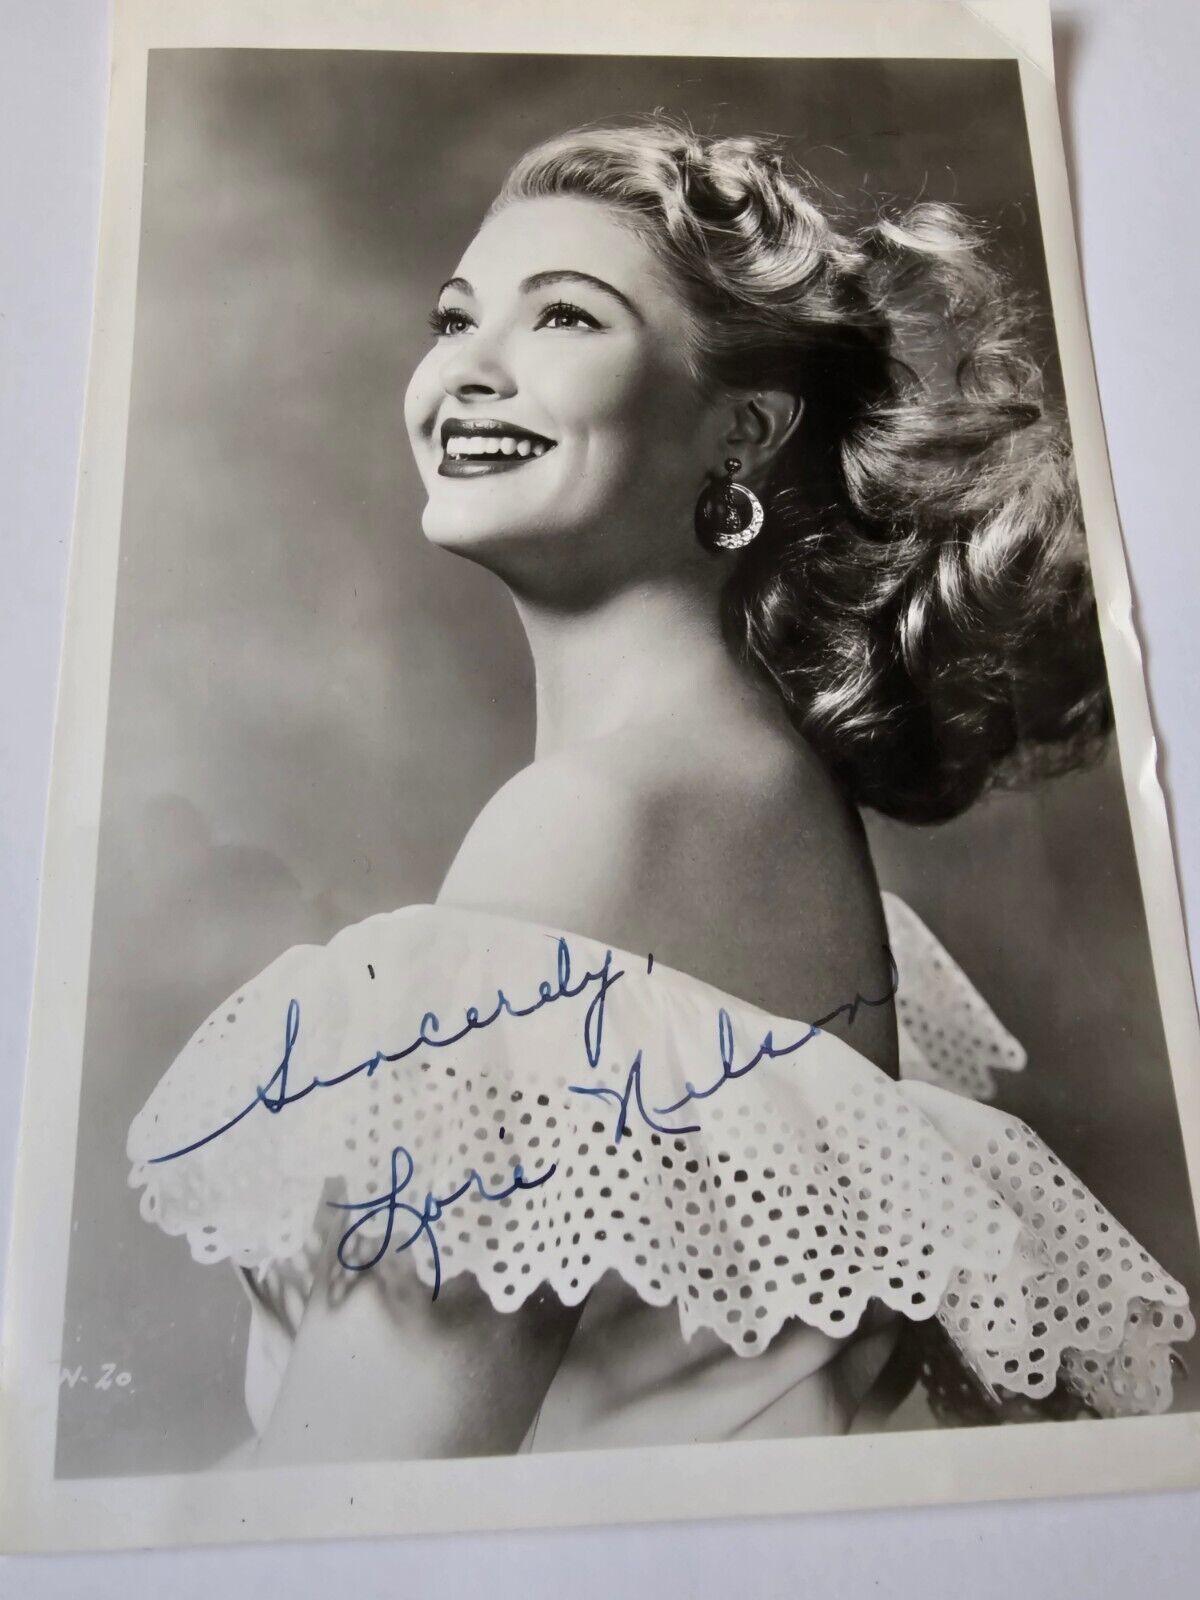 Lori Nelson-STUNNING Vintage Signed Photograph 5x7 Black and White Glossy